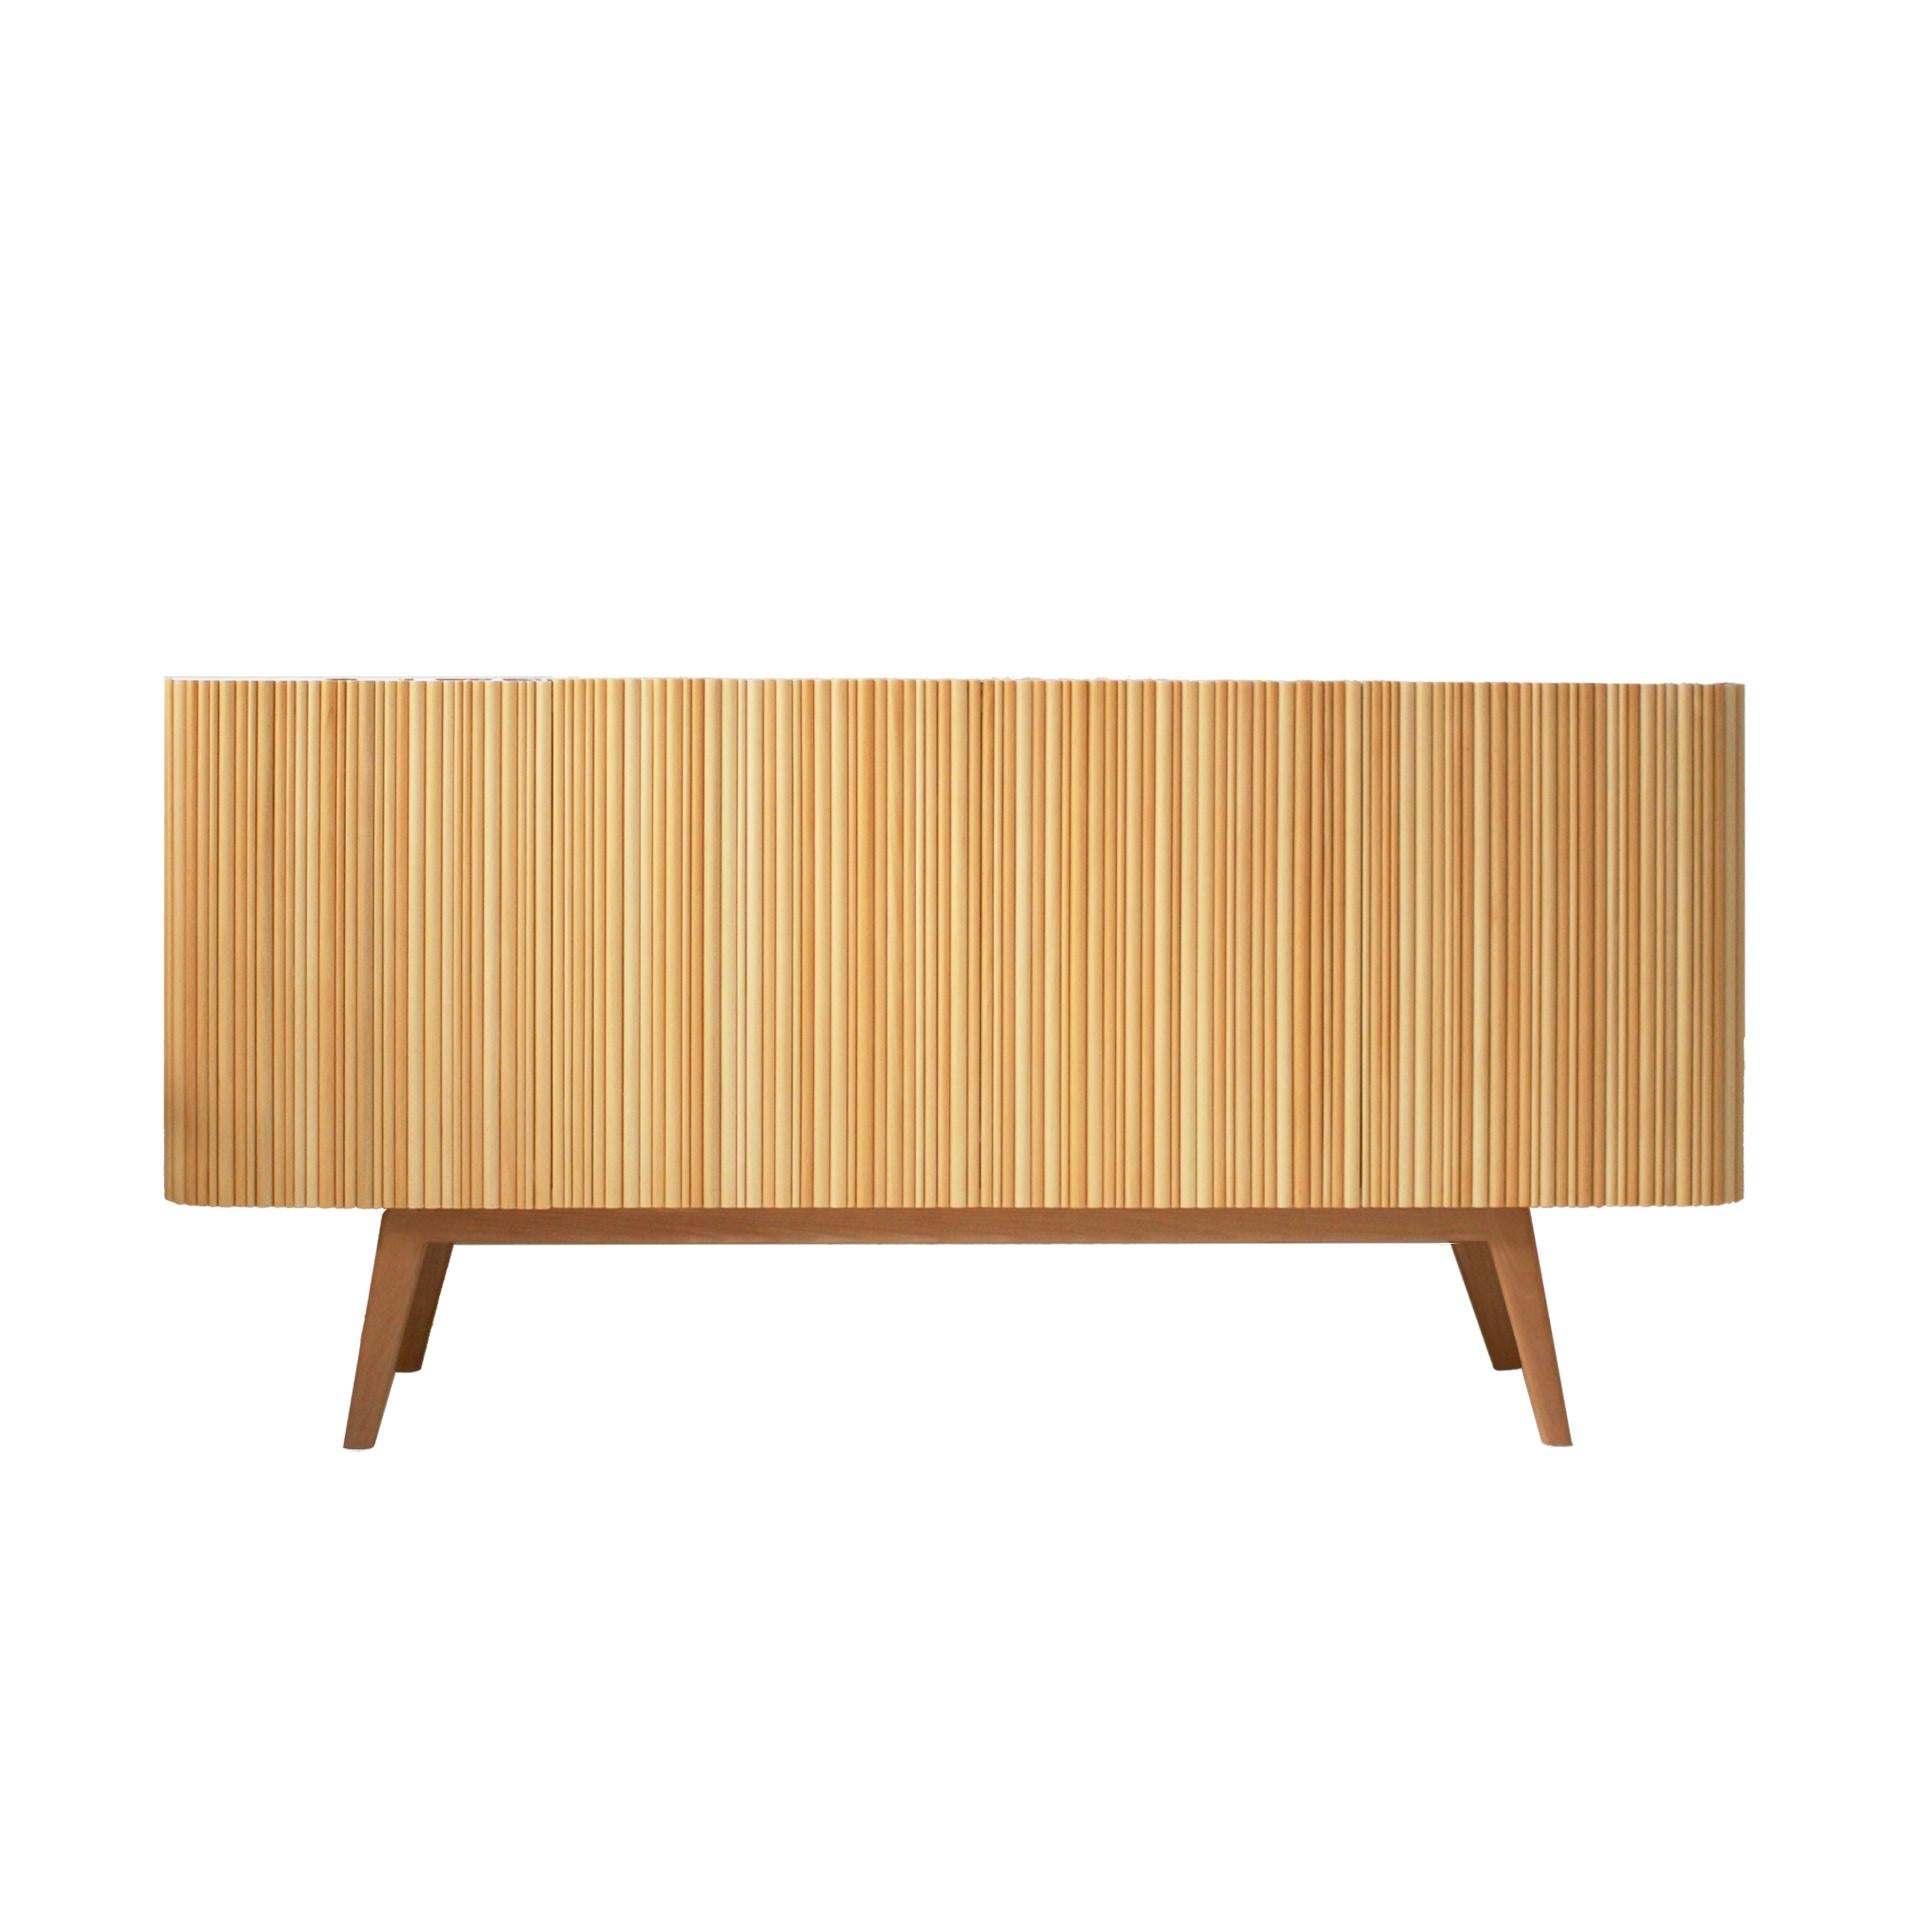 Sideboard designed by L.A. Studio, with a linden texture semicircular profile sitting on the surface, making handles hidden. Composed of four folding doors and one wooden shelf inside. The outside is made of linden and the inside is lemongrass wood.